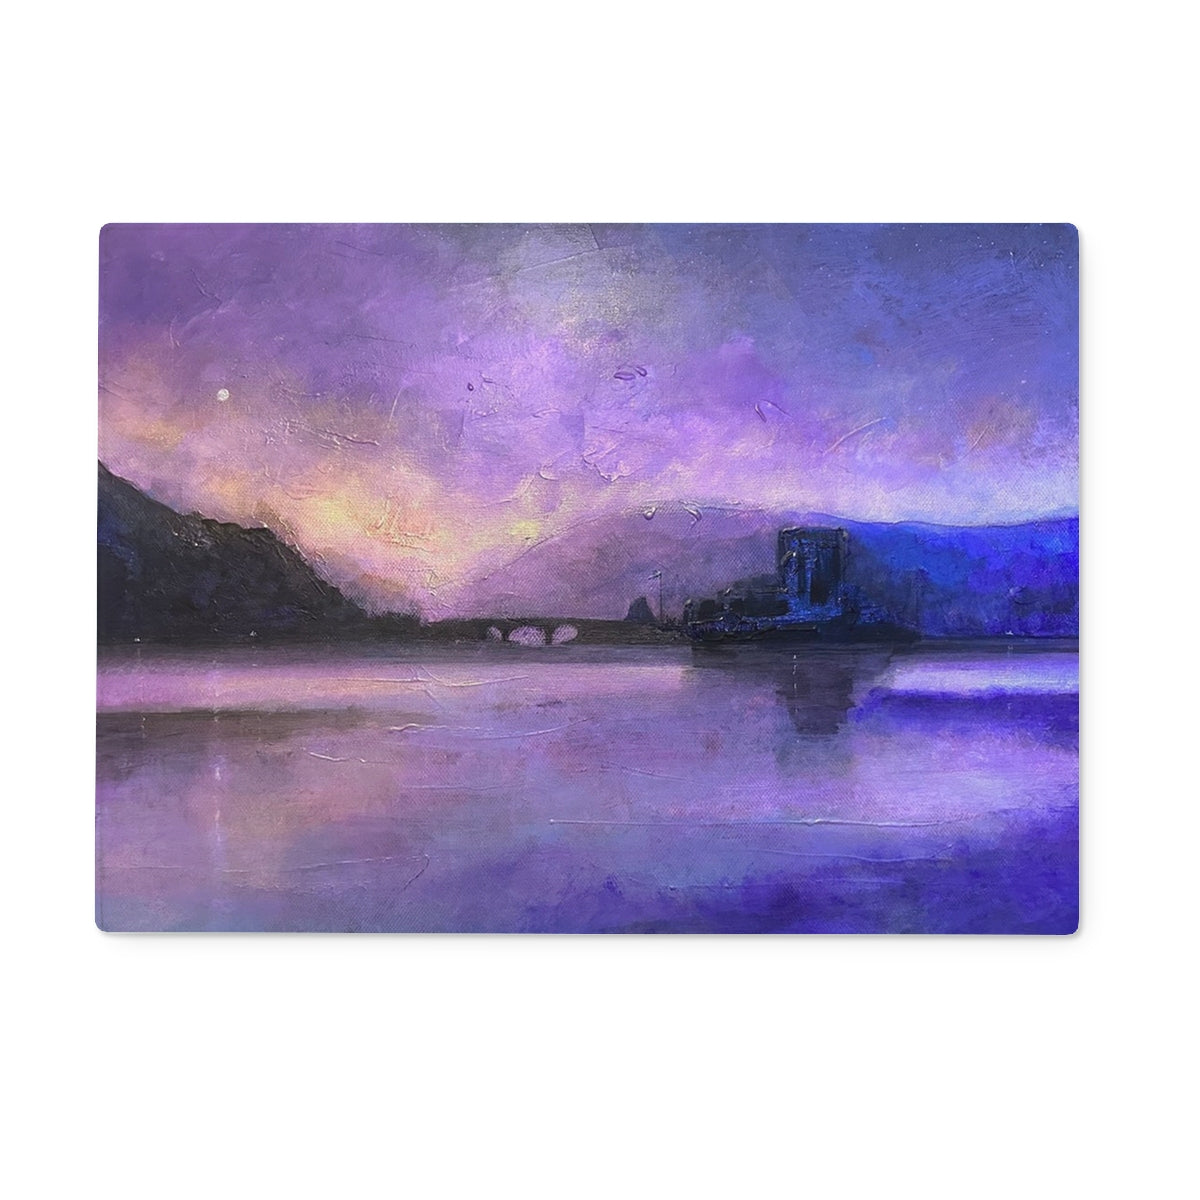 Eilean Donan Castle Moonset Art Gifts Glass Chopping Board-Glass Chopping Boards-Historic & Iconic Scotland Art Gallery-15"x11" Rectangular-Paintings, Prints, Homeware, Art Gifts From Scotland By Scottish Artist Kevin Hunter